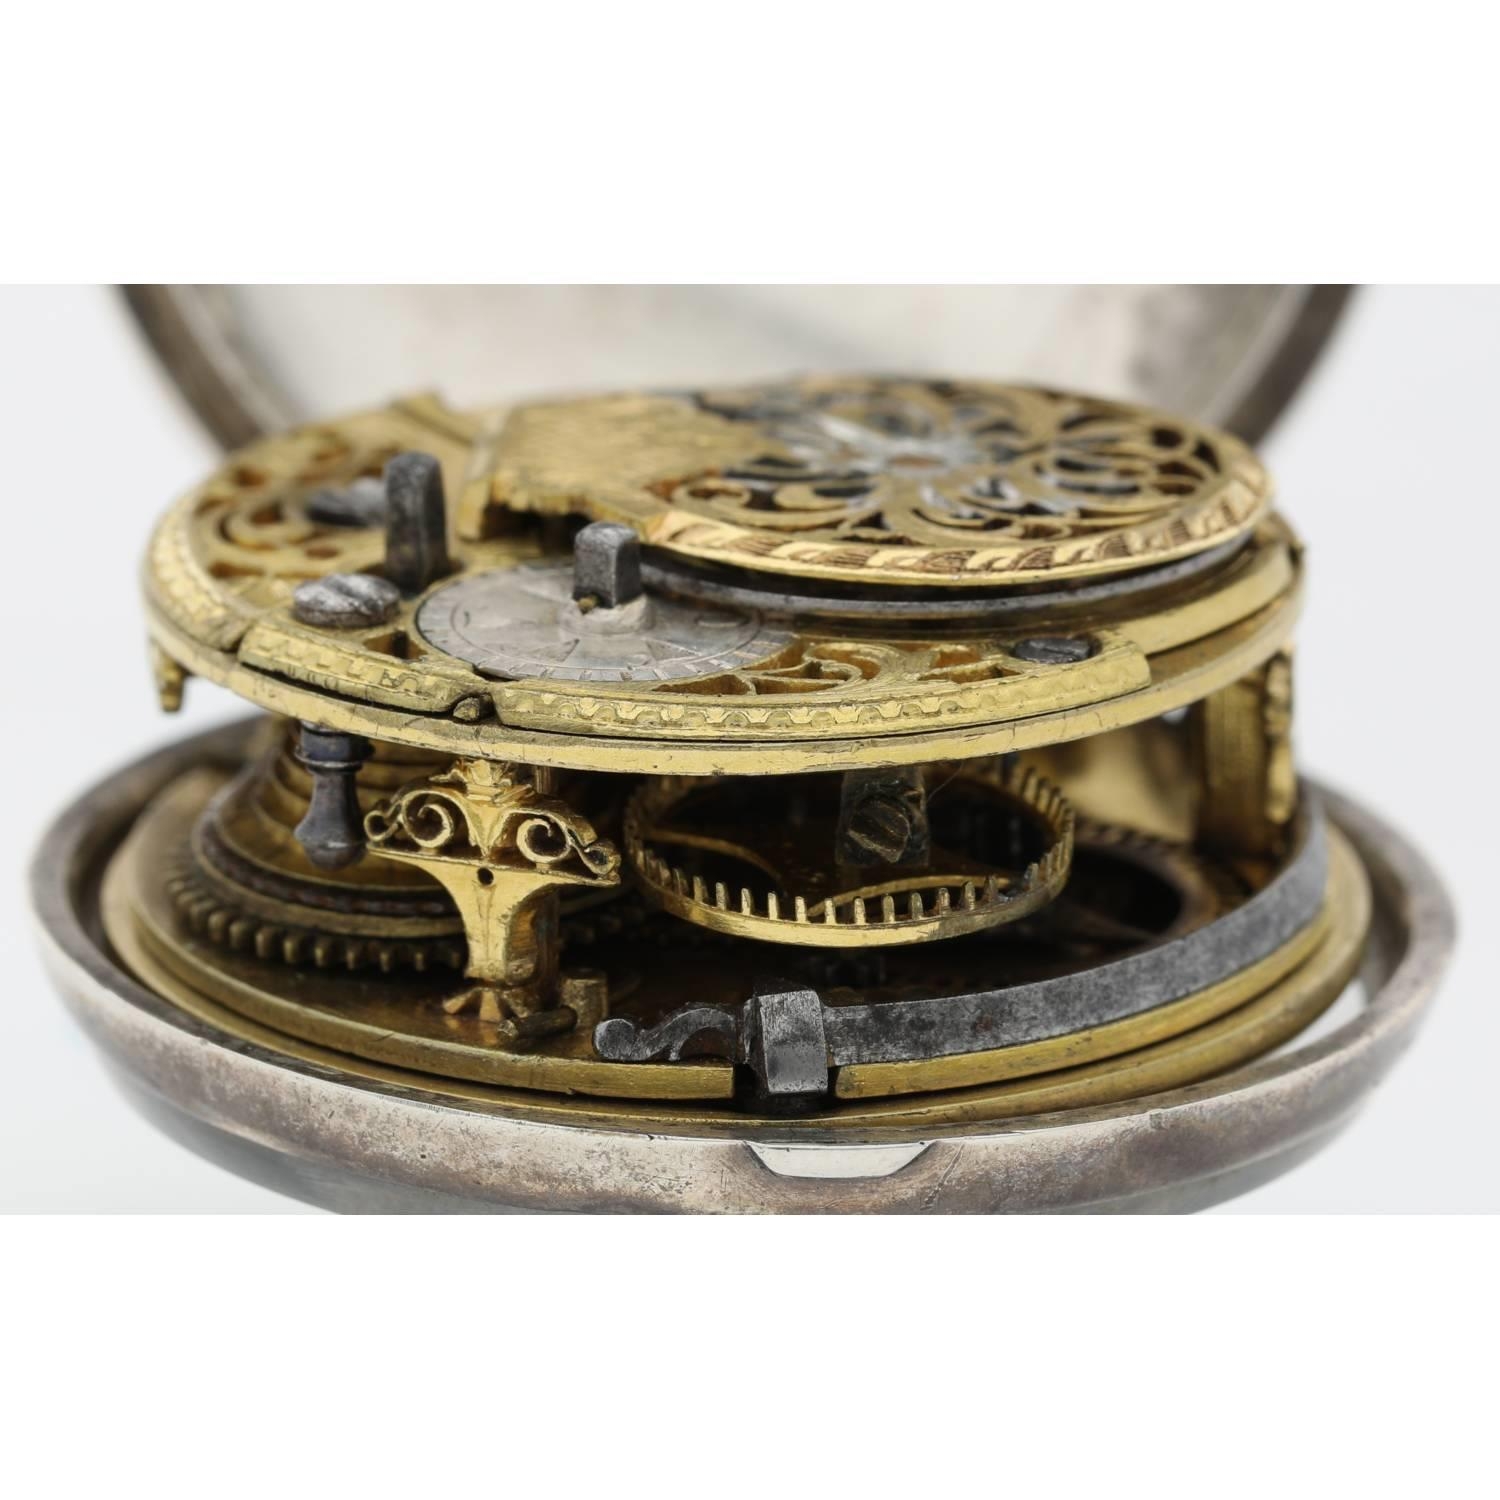 George Clarke, London - mid-18th century silver pair cased verge pocket watch made for the Turkish - Image 5 of 10